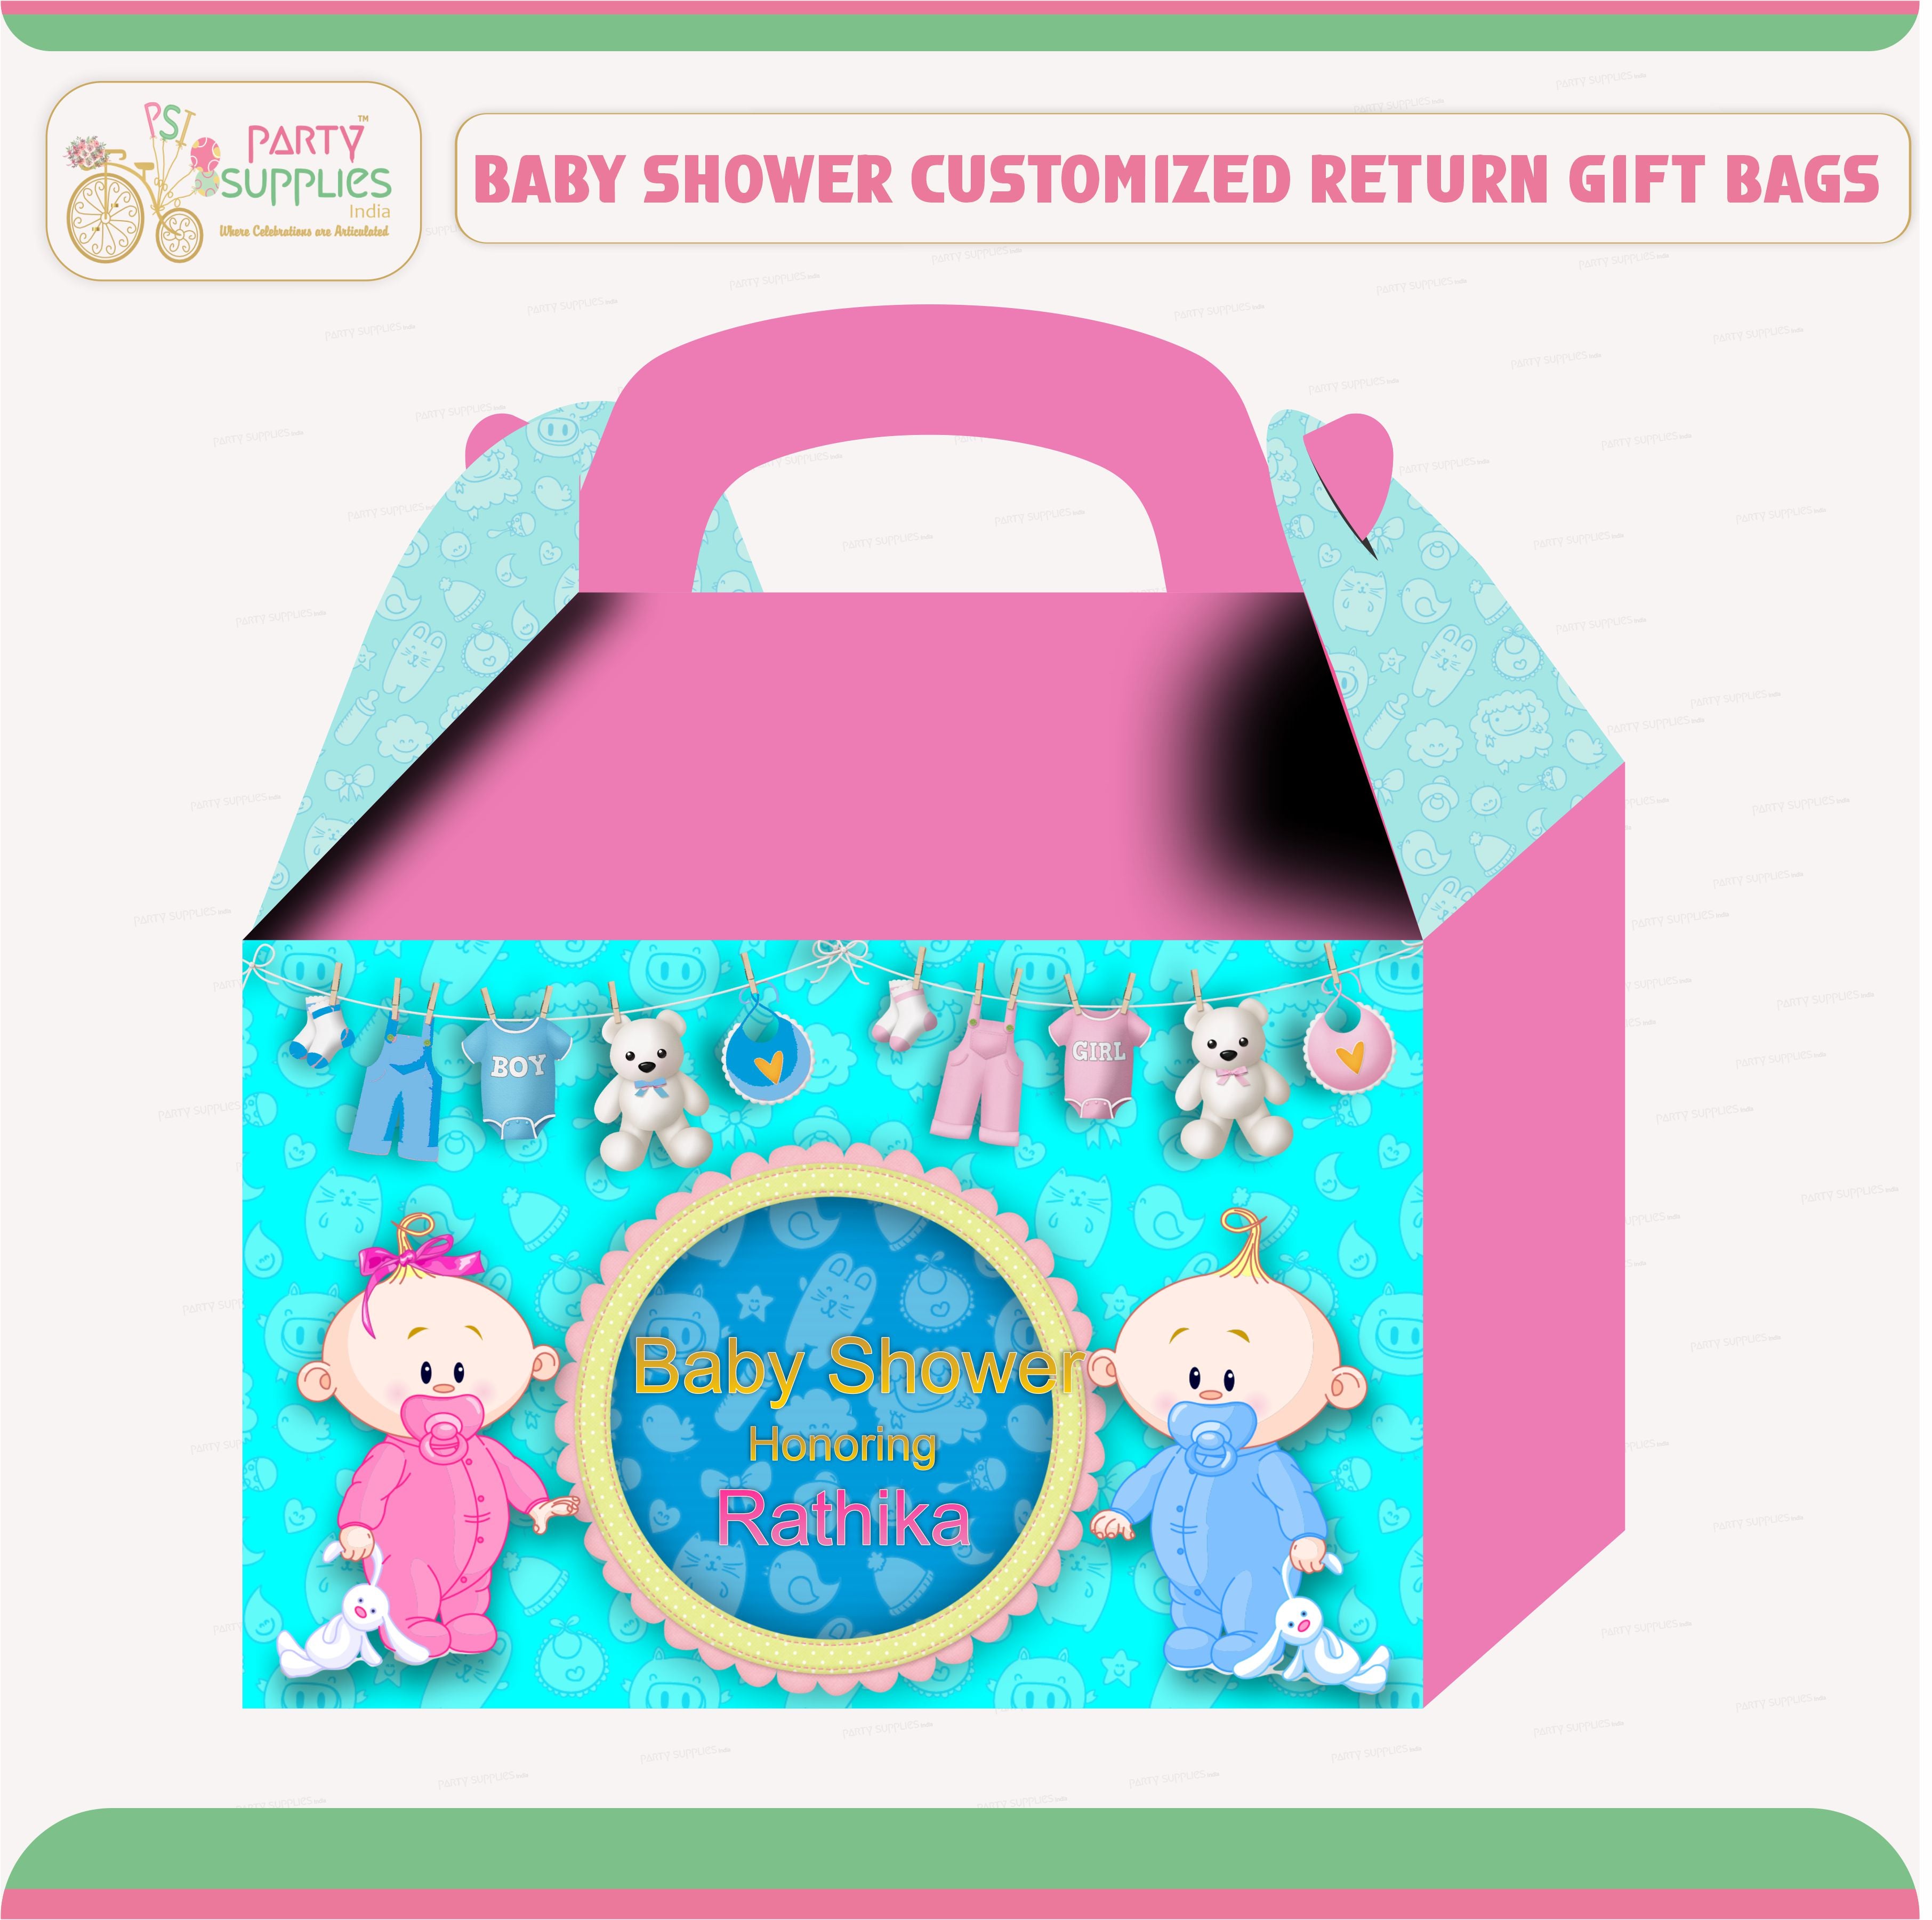 PSI Baby Shower Theme Goodie Return Gift Boxes